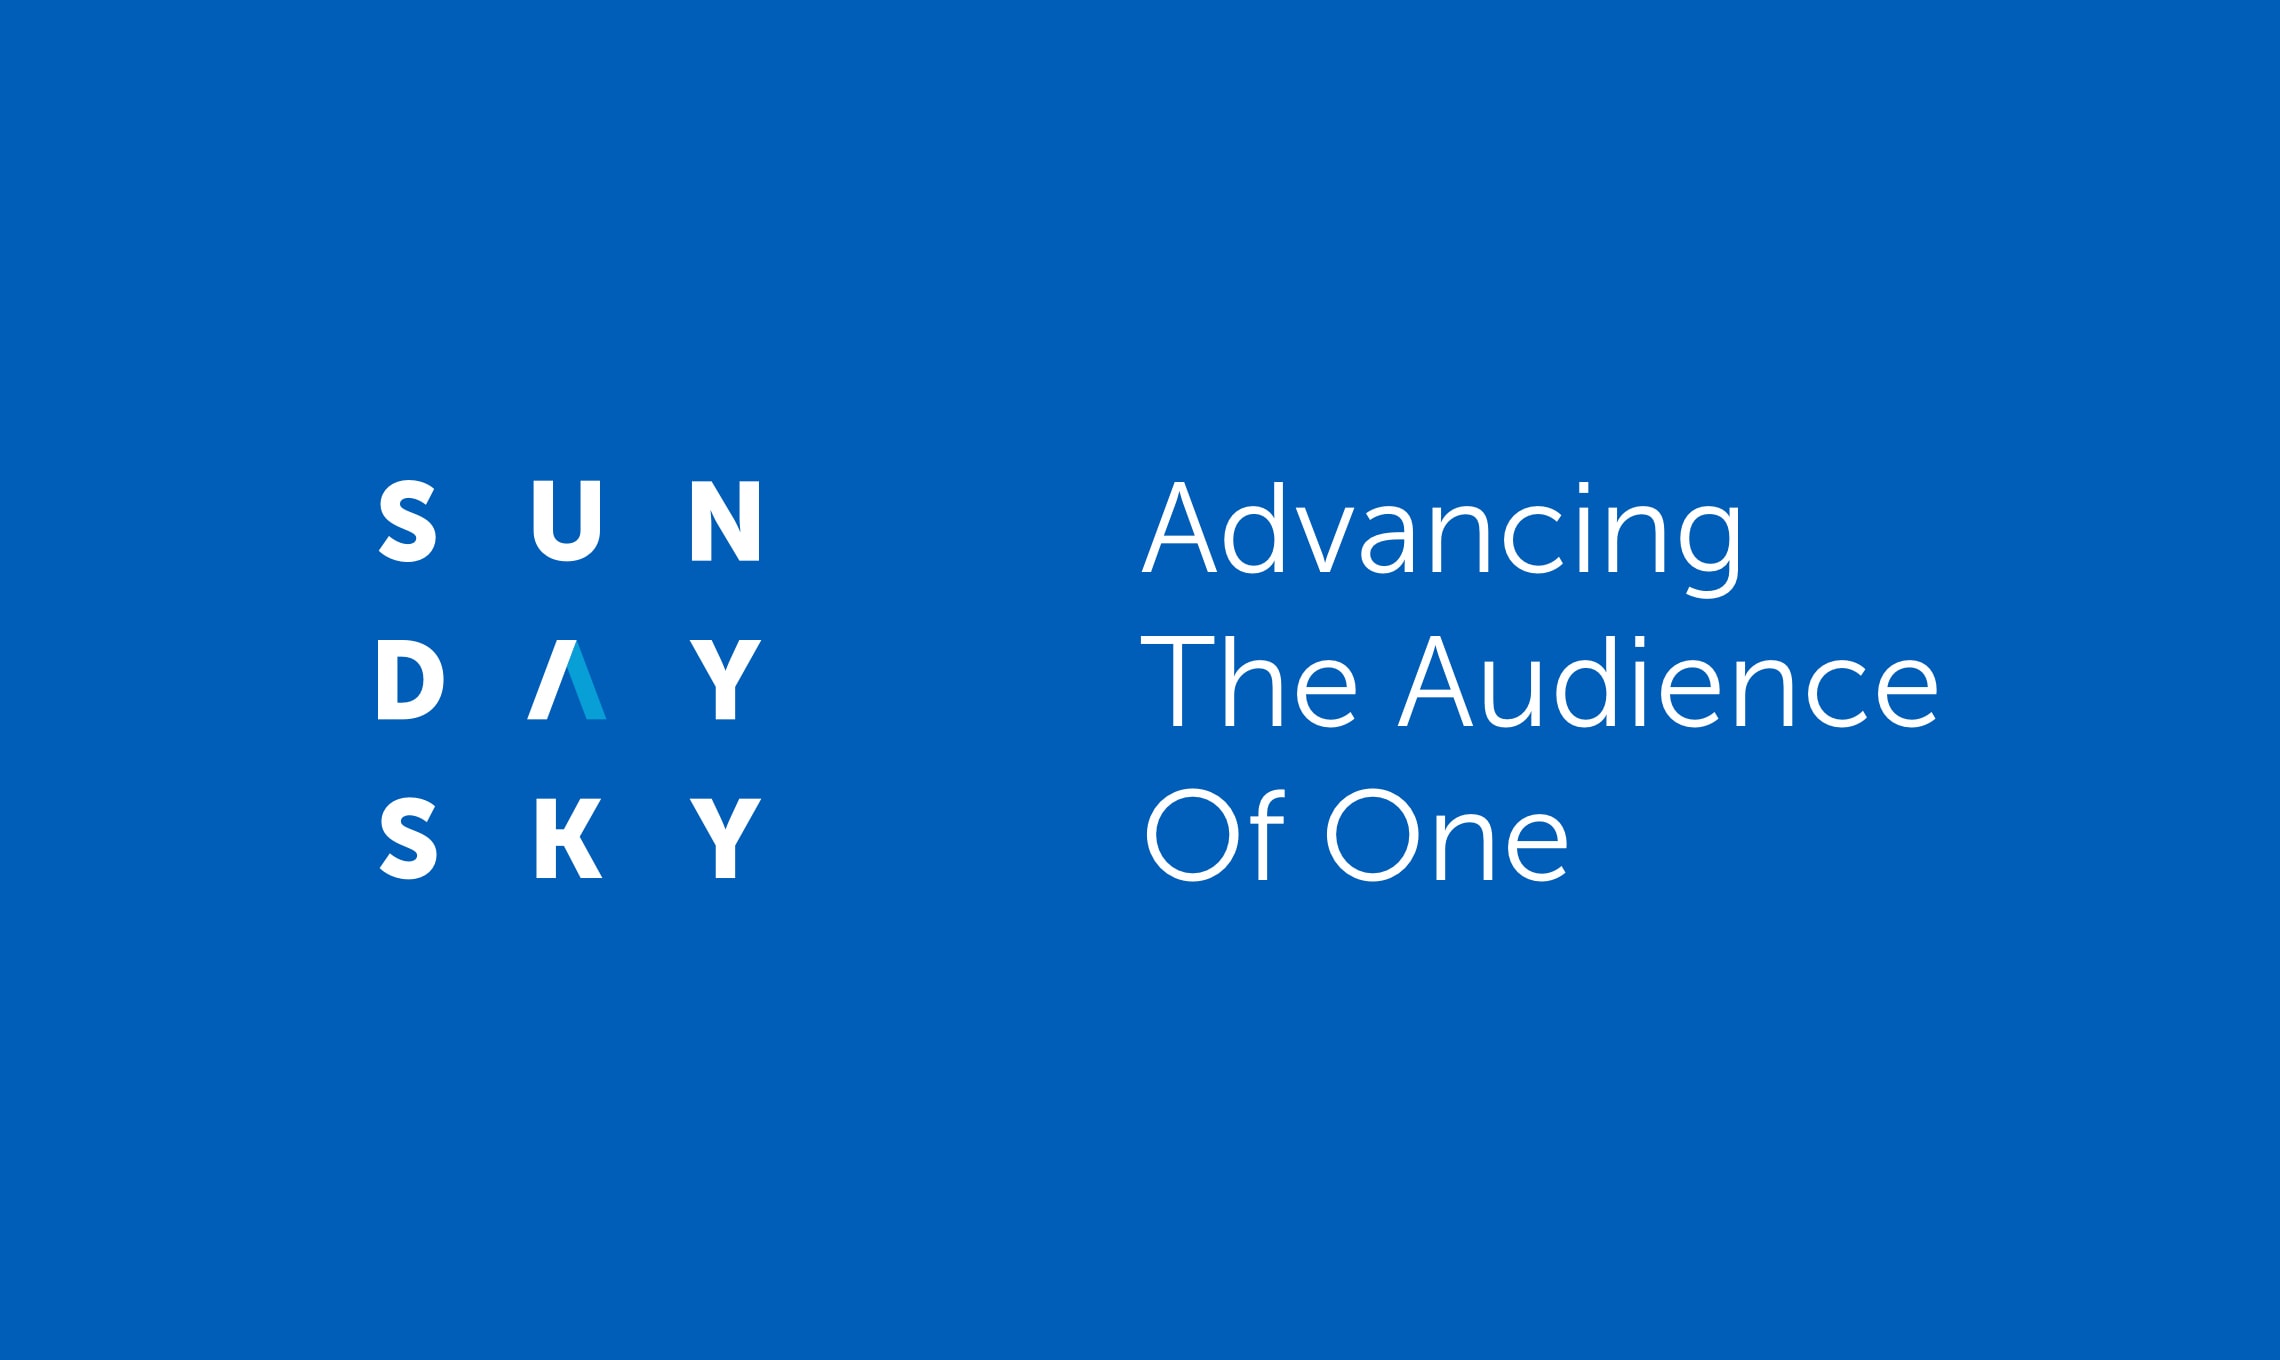 The sunday sky logo with the words advancing the audience of one.